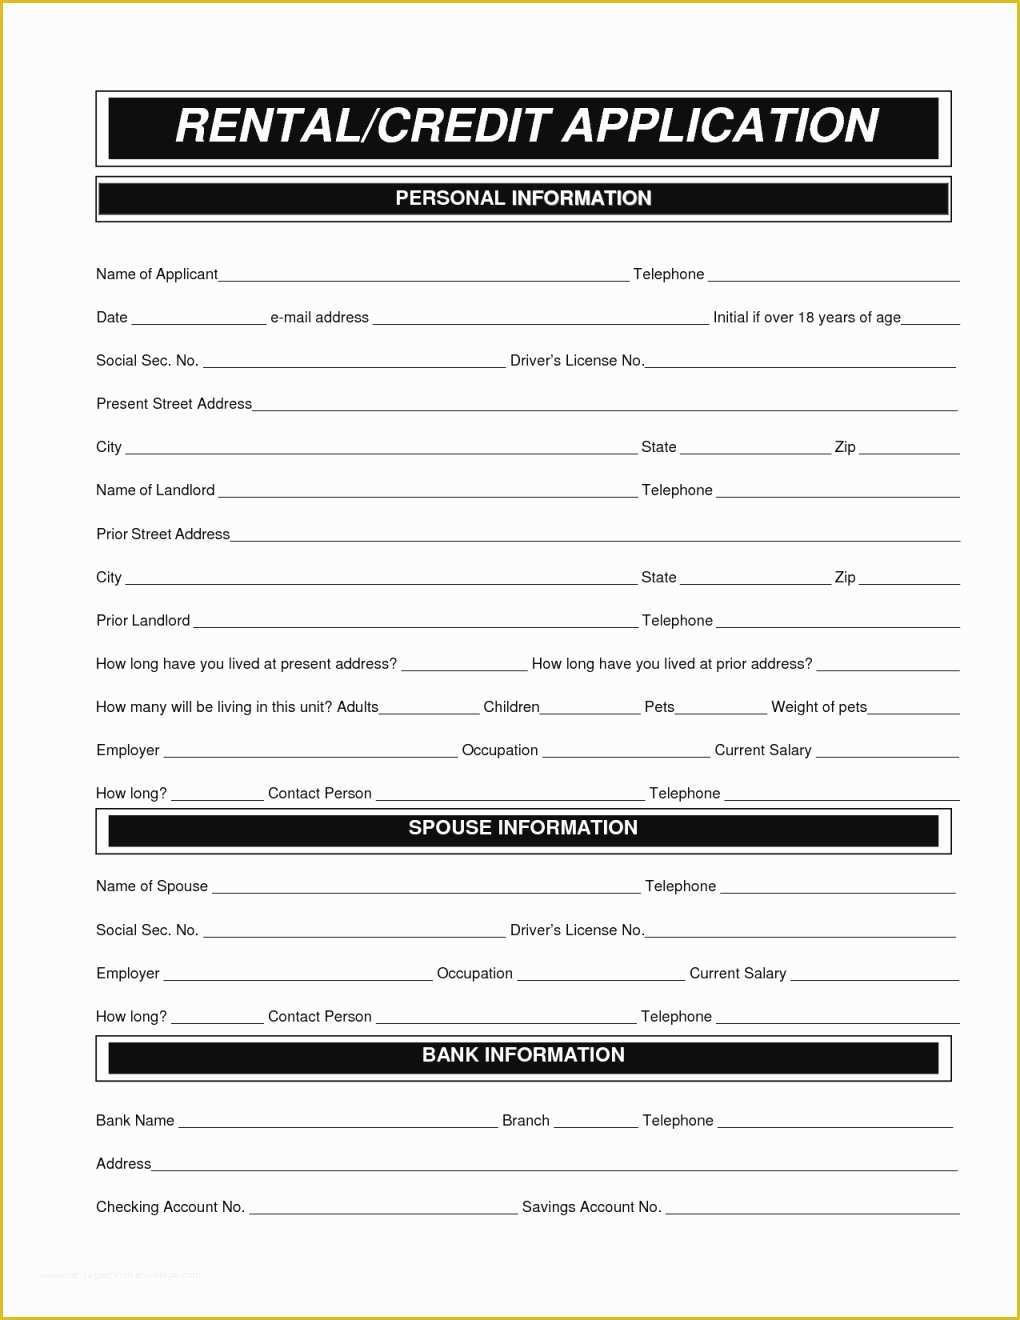 Rental Credit Application Template Free Of Tenant Credit Check Application form